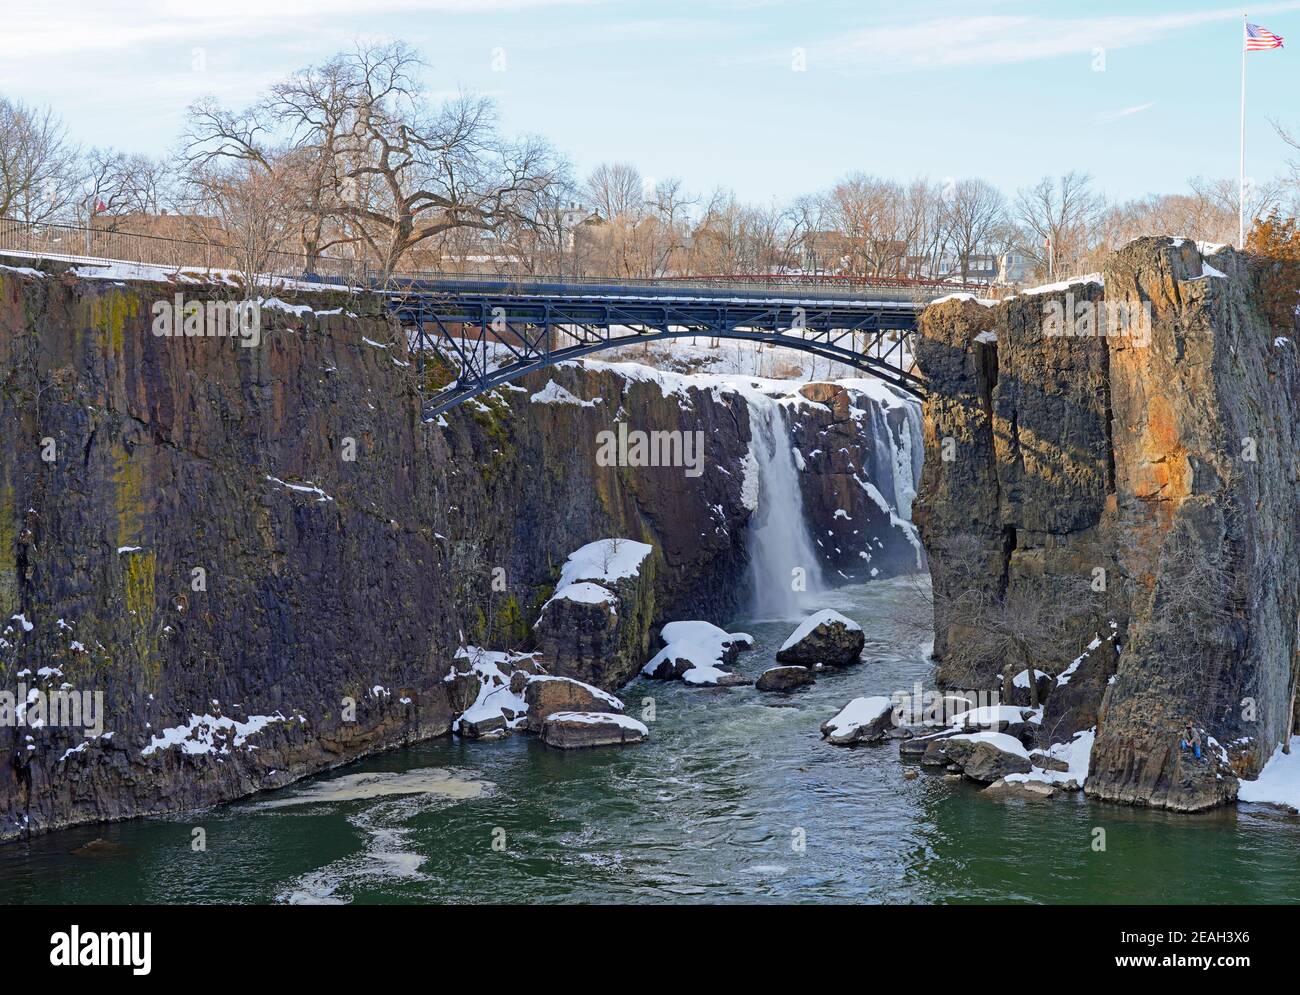 PATERSON, NJ -6 FEB 2021- Winter view of the Great Falls of the Passaic River, part of the Paterson Great Falls National Historical Park in New Jersey Stock Photo